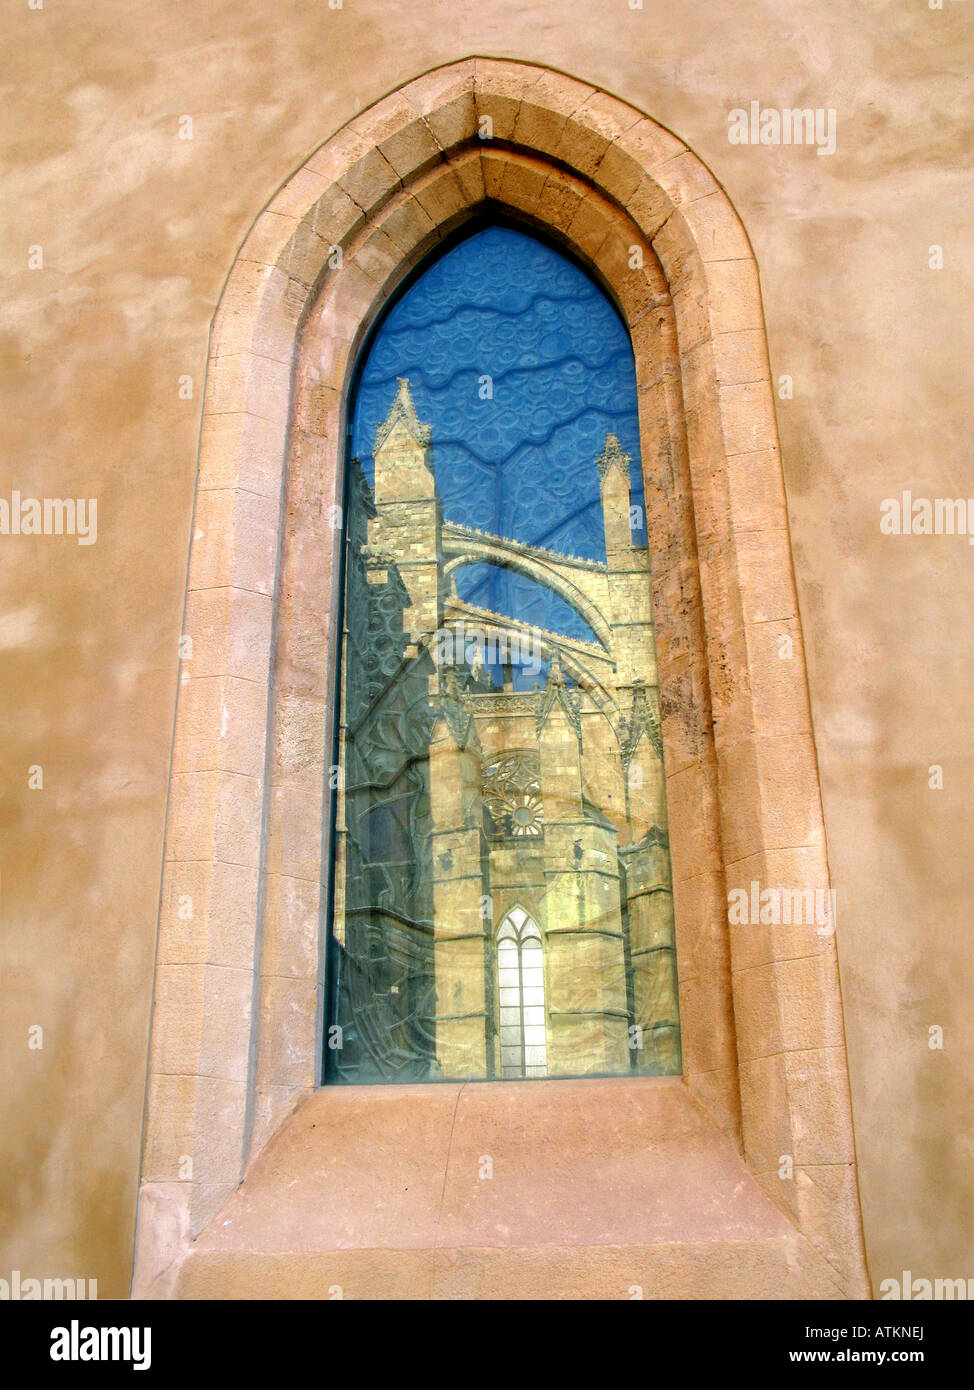 Reflection of Palma Cathedral seen in an upright narrow window, Mallorca, Spain Stock Photo